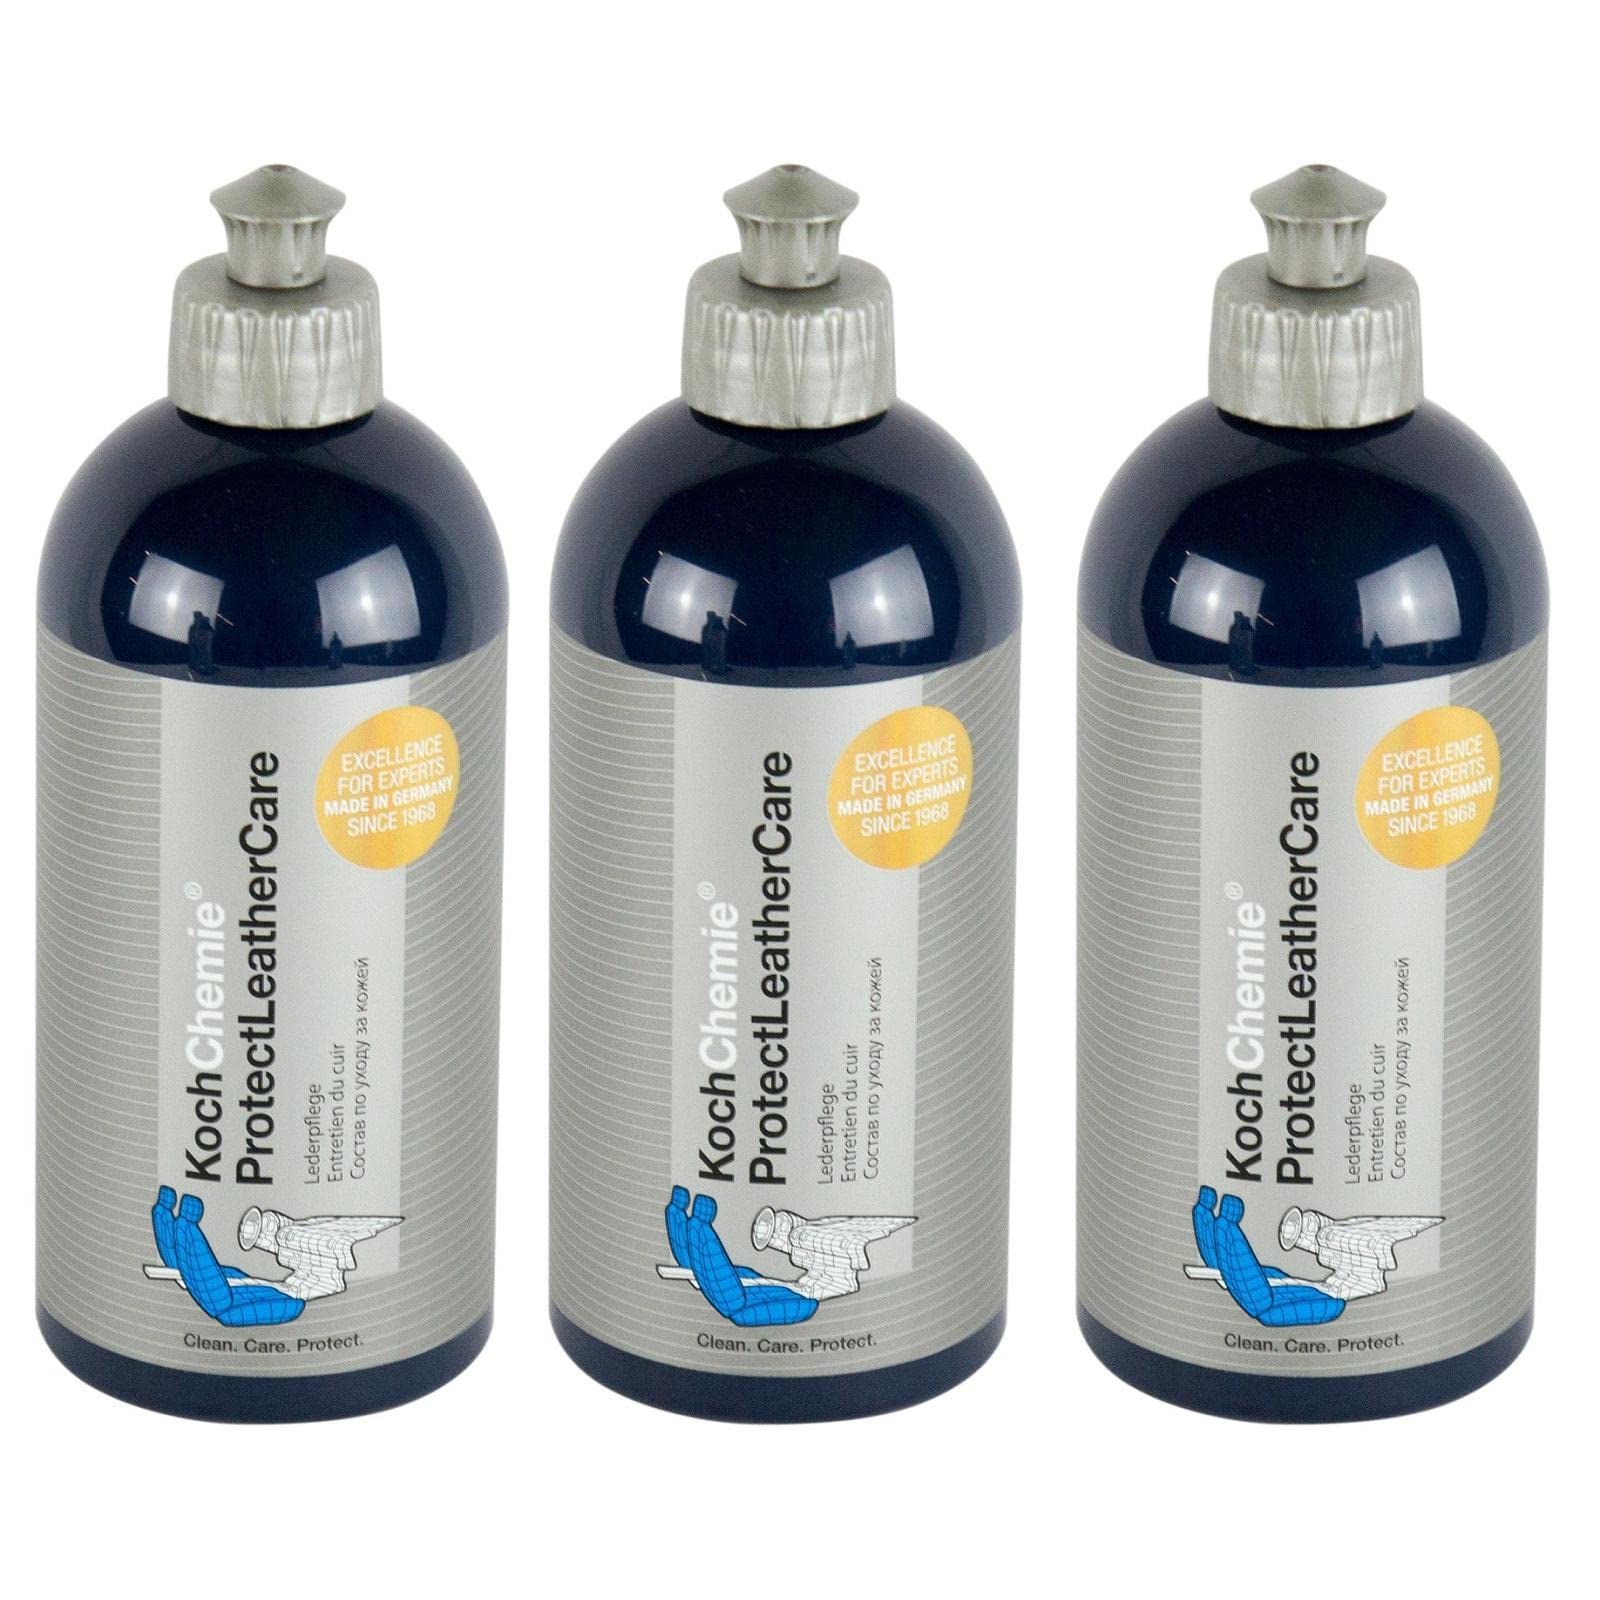 Koch Chemie 3X Protect Leather Care Lederpflege Lederreiniger Reiniger 500 ml von KOCH CHEMIE